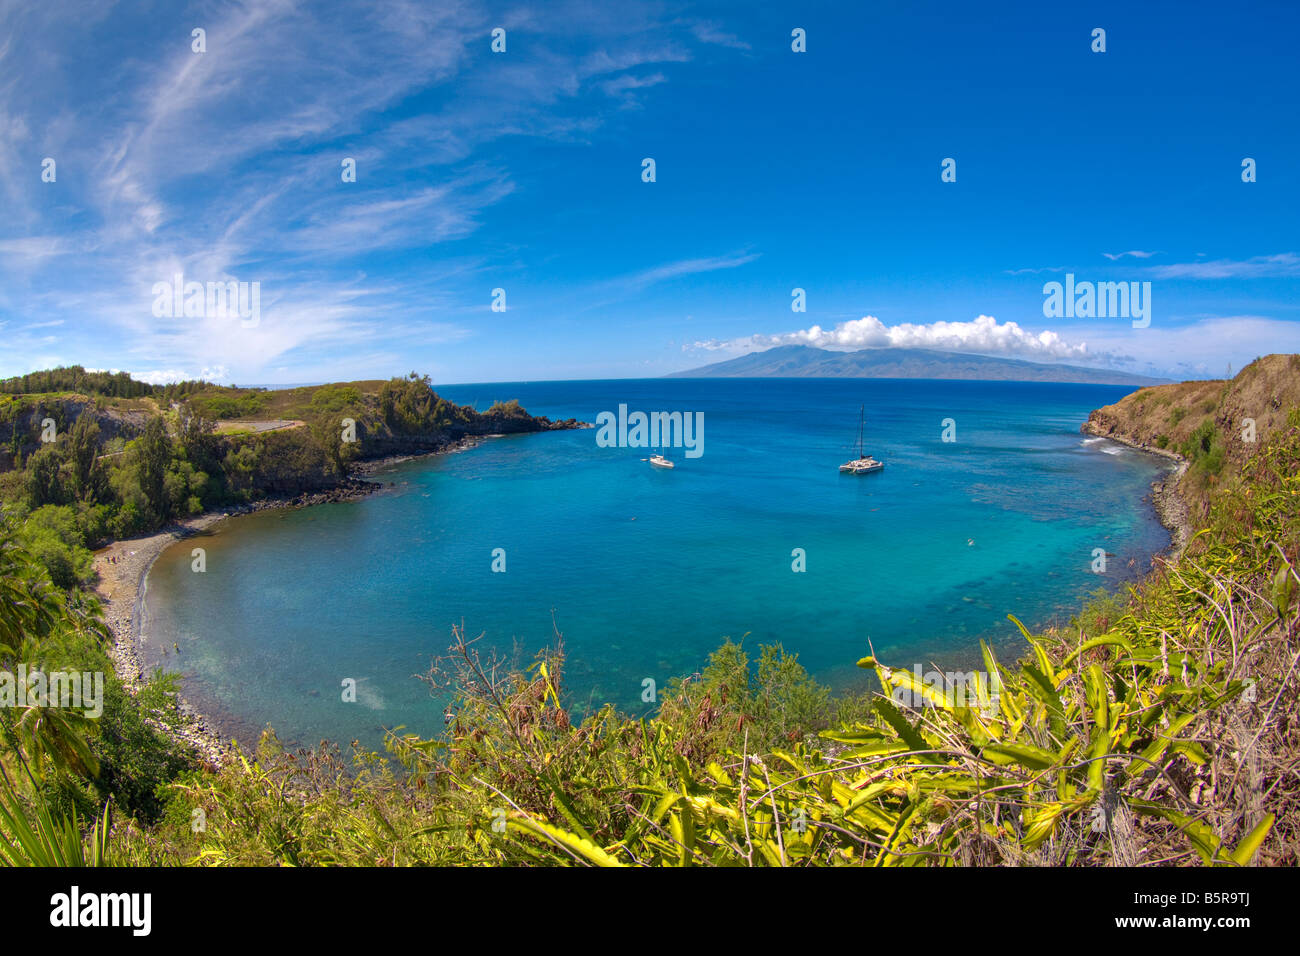 Sailboats and snorkelers in Honolua Bay, Maui, Hawaii. The eastern end of the island of Molokai is in the background. Stock Photo